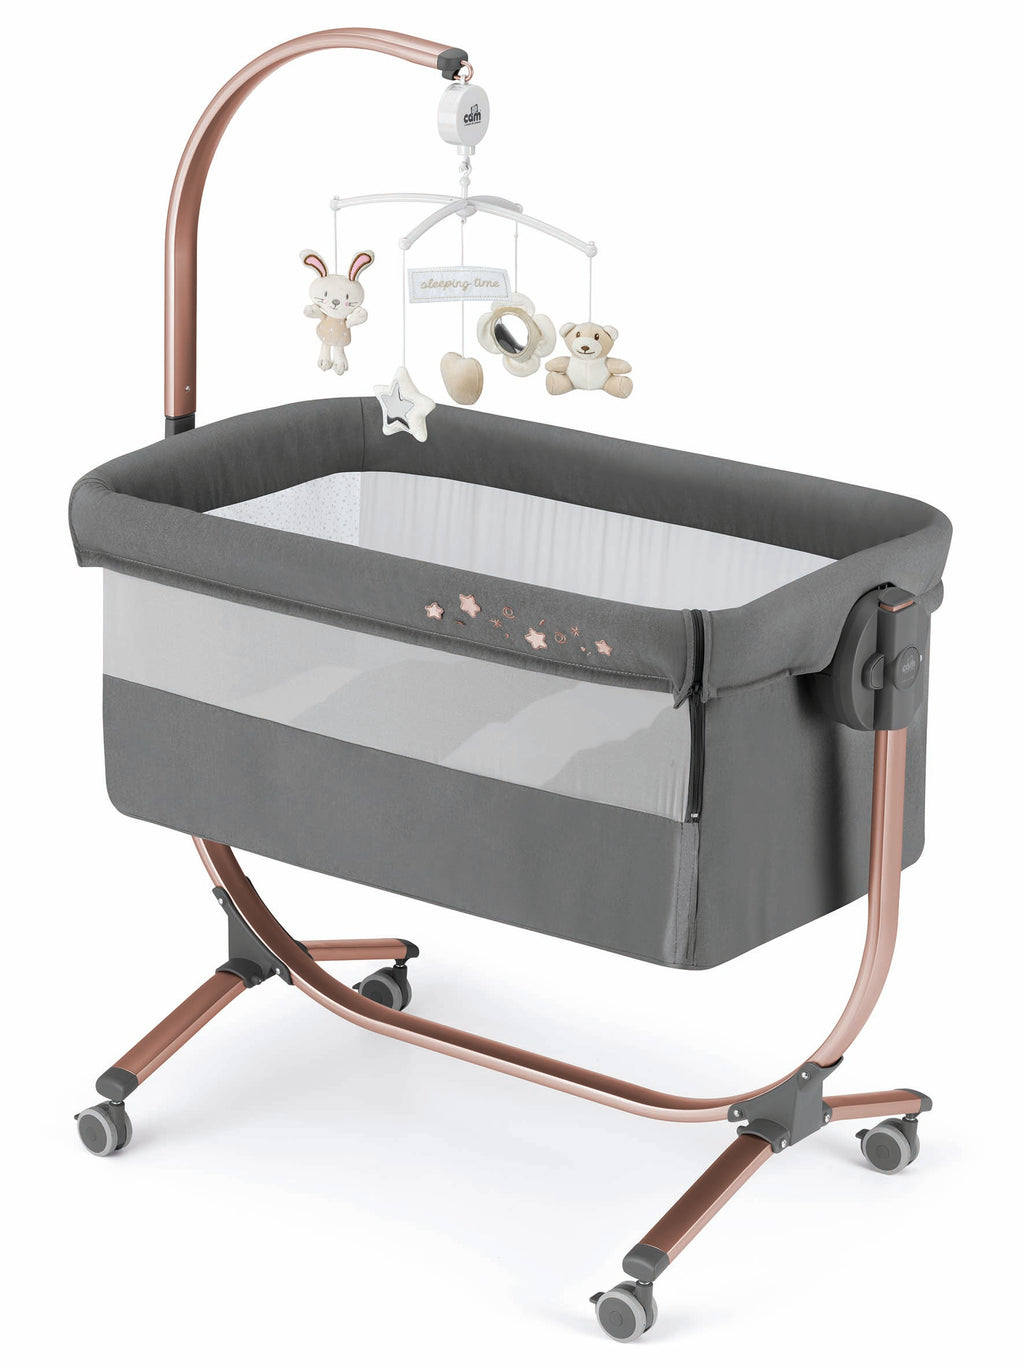 Cullami Co-Sleeper Crib Cot in grey - Safe and Comfortable Sleeping Space for Your Little One and available in South Africa